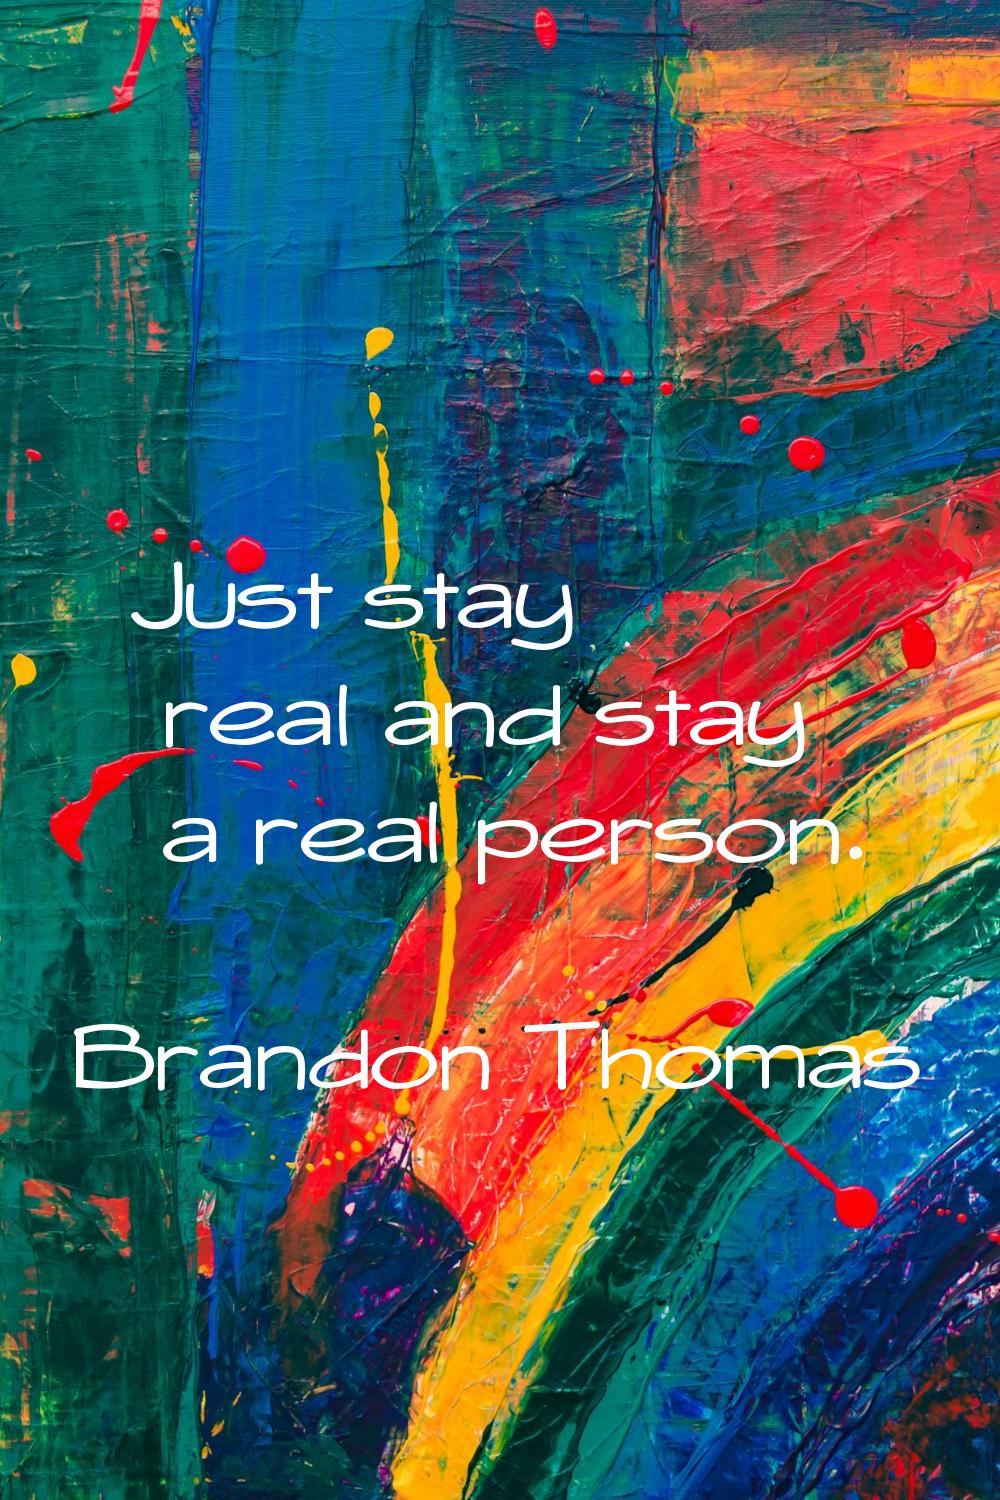 Just stay real and stay a real person.